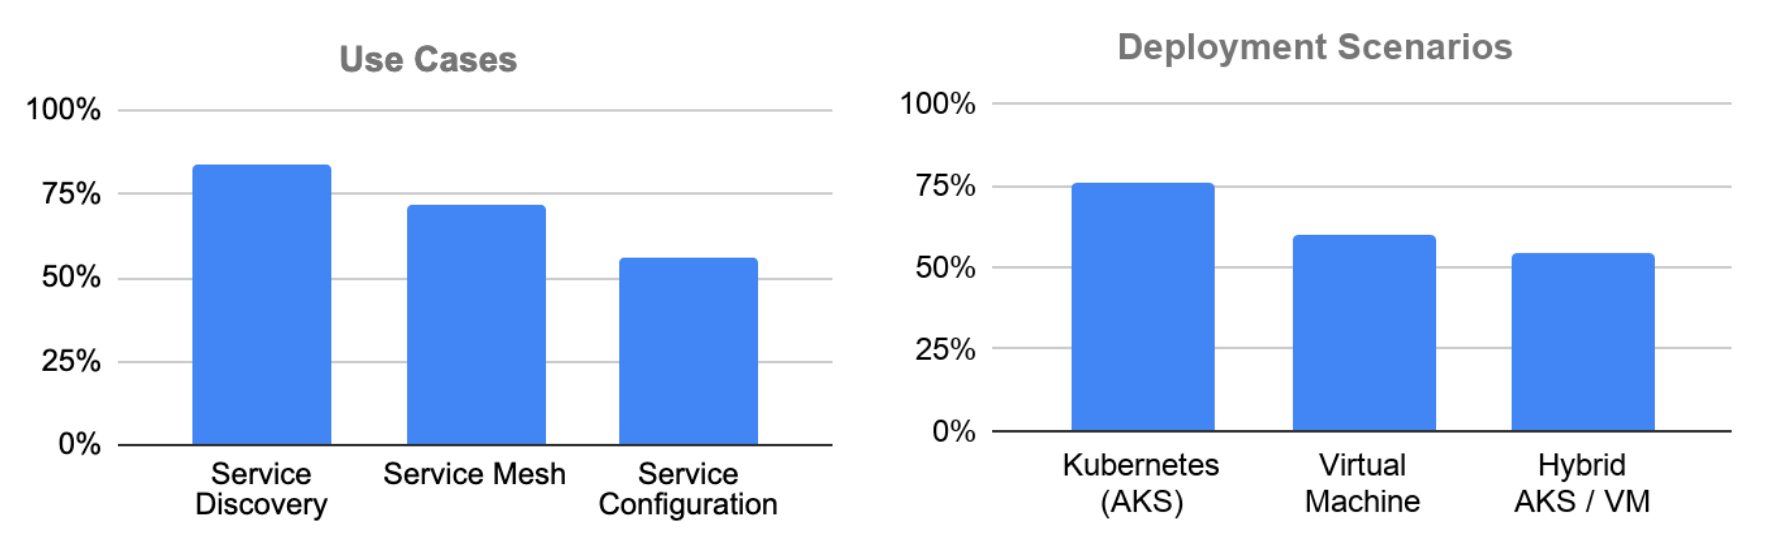 Common deployment scenarios for HCS private beta users - Service Discovery and AKS being the most common